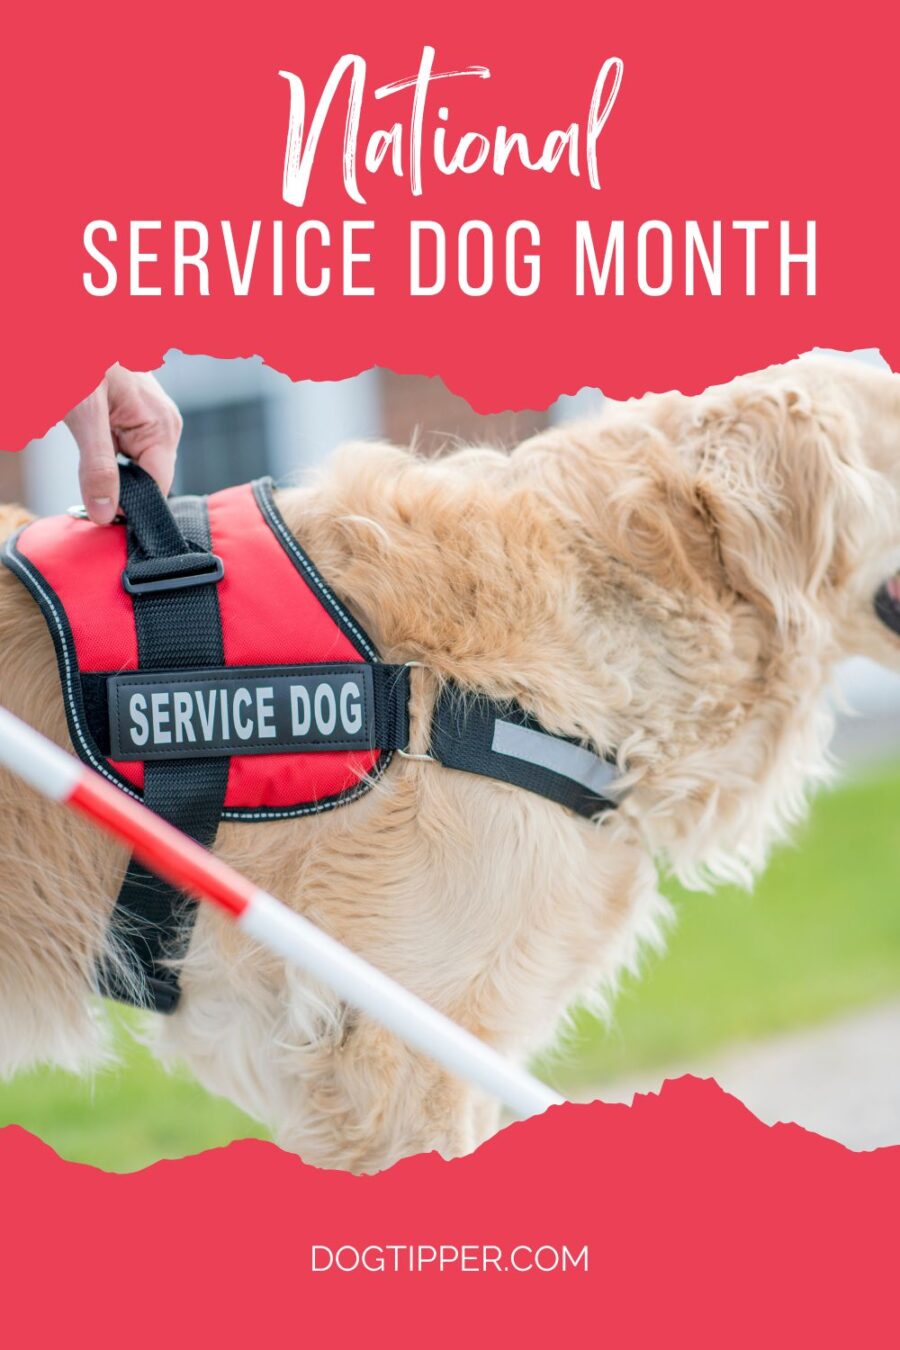 National Service Dog Month -- Explore the differences between service dogs, therapy dogs and emotional support dogs